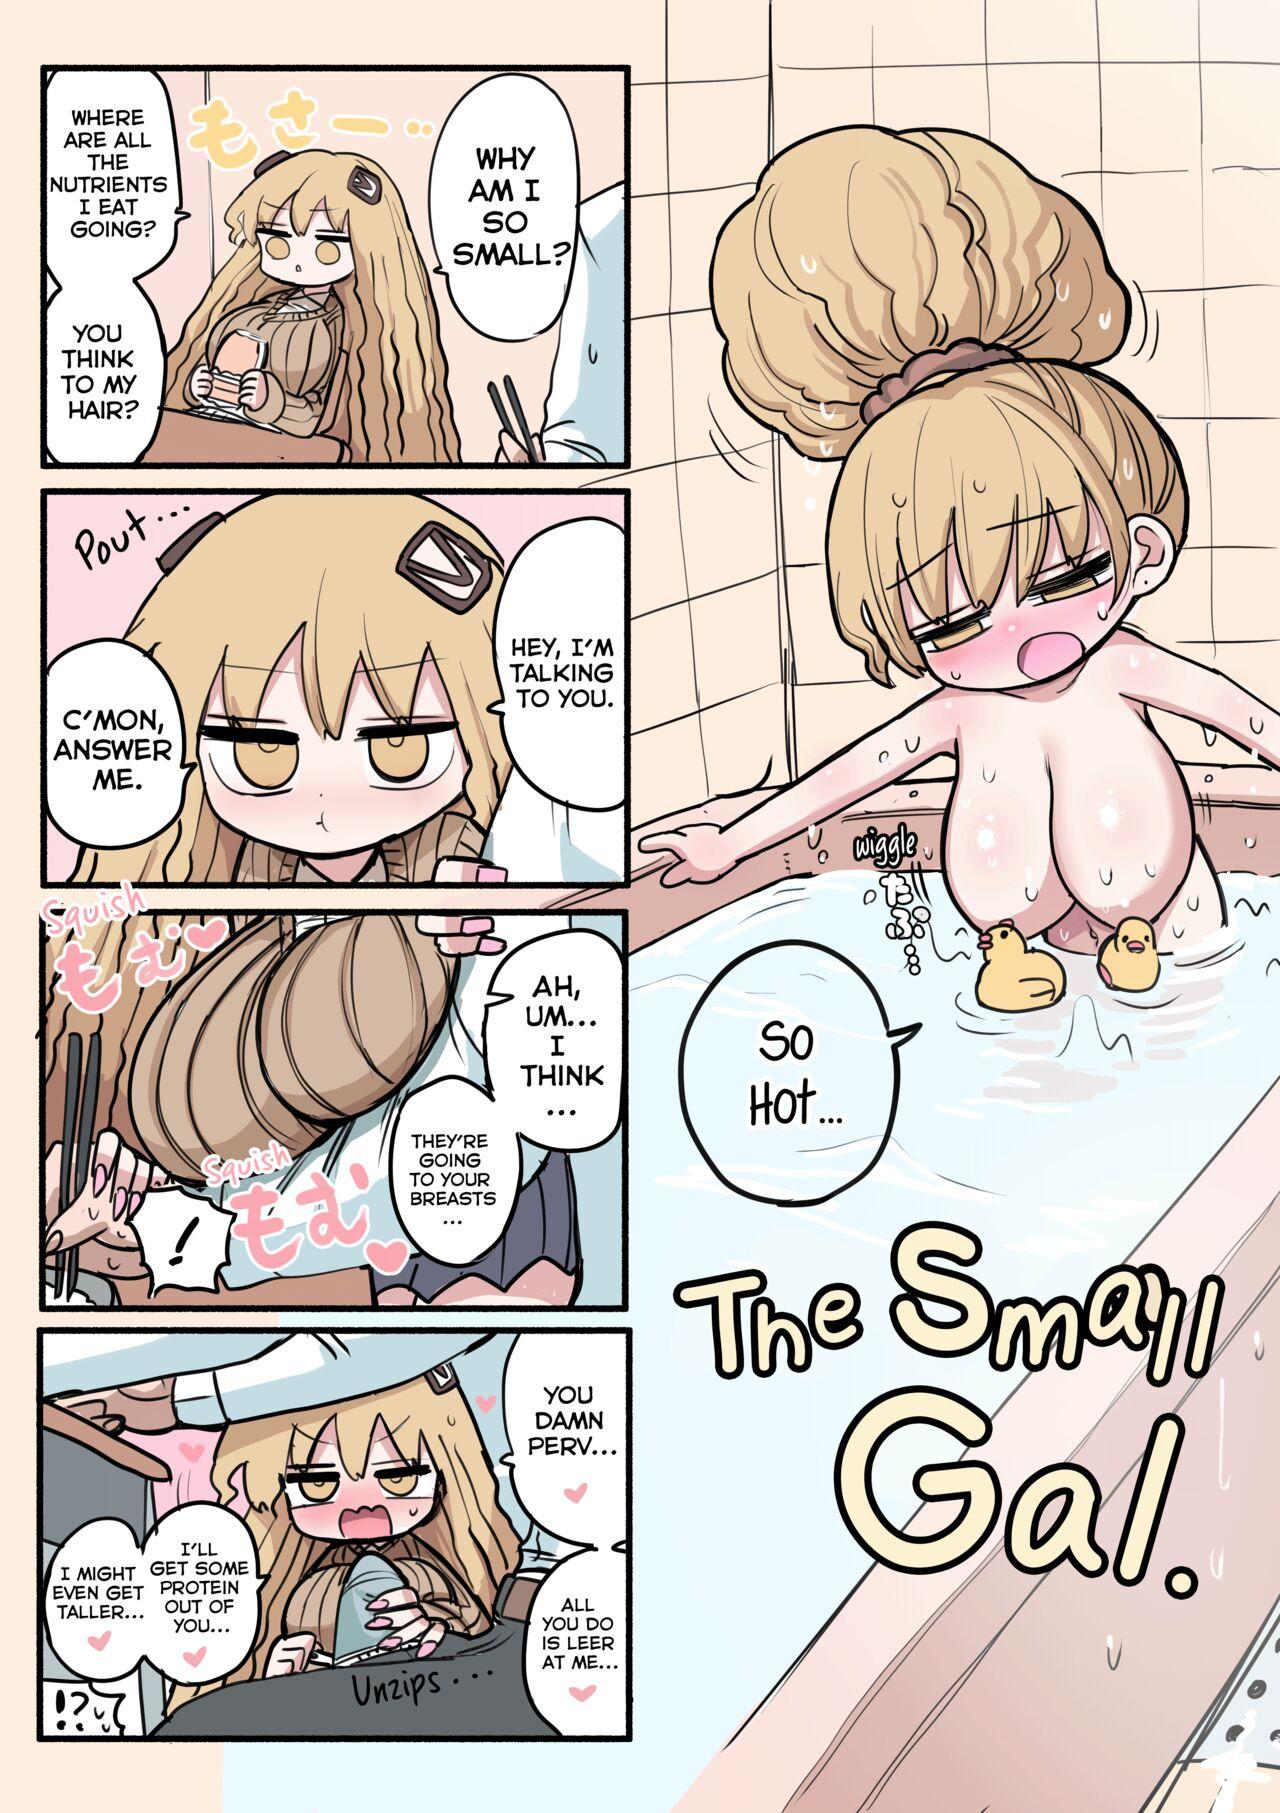 Chiisai Gal | The Small Gal 18